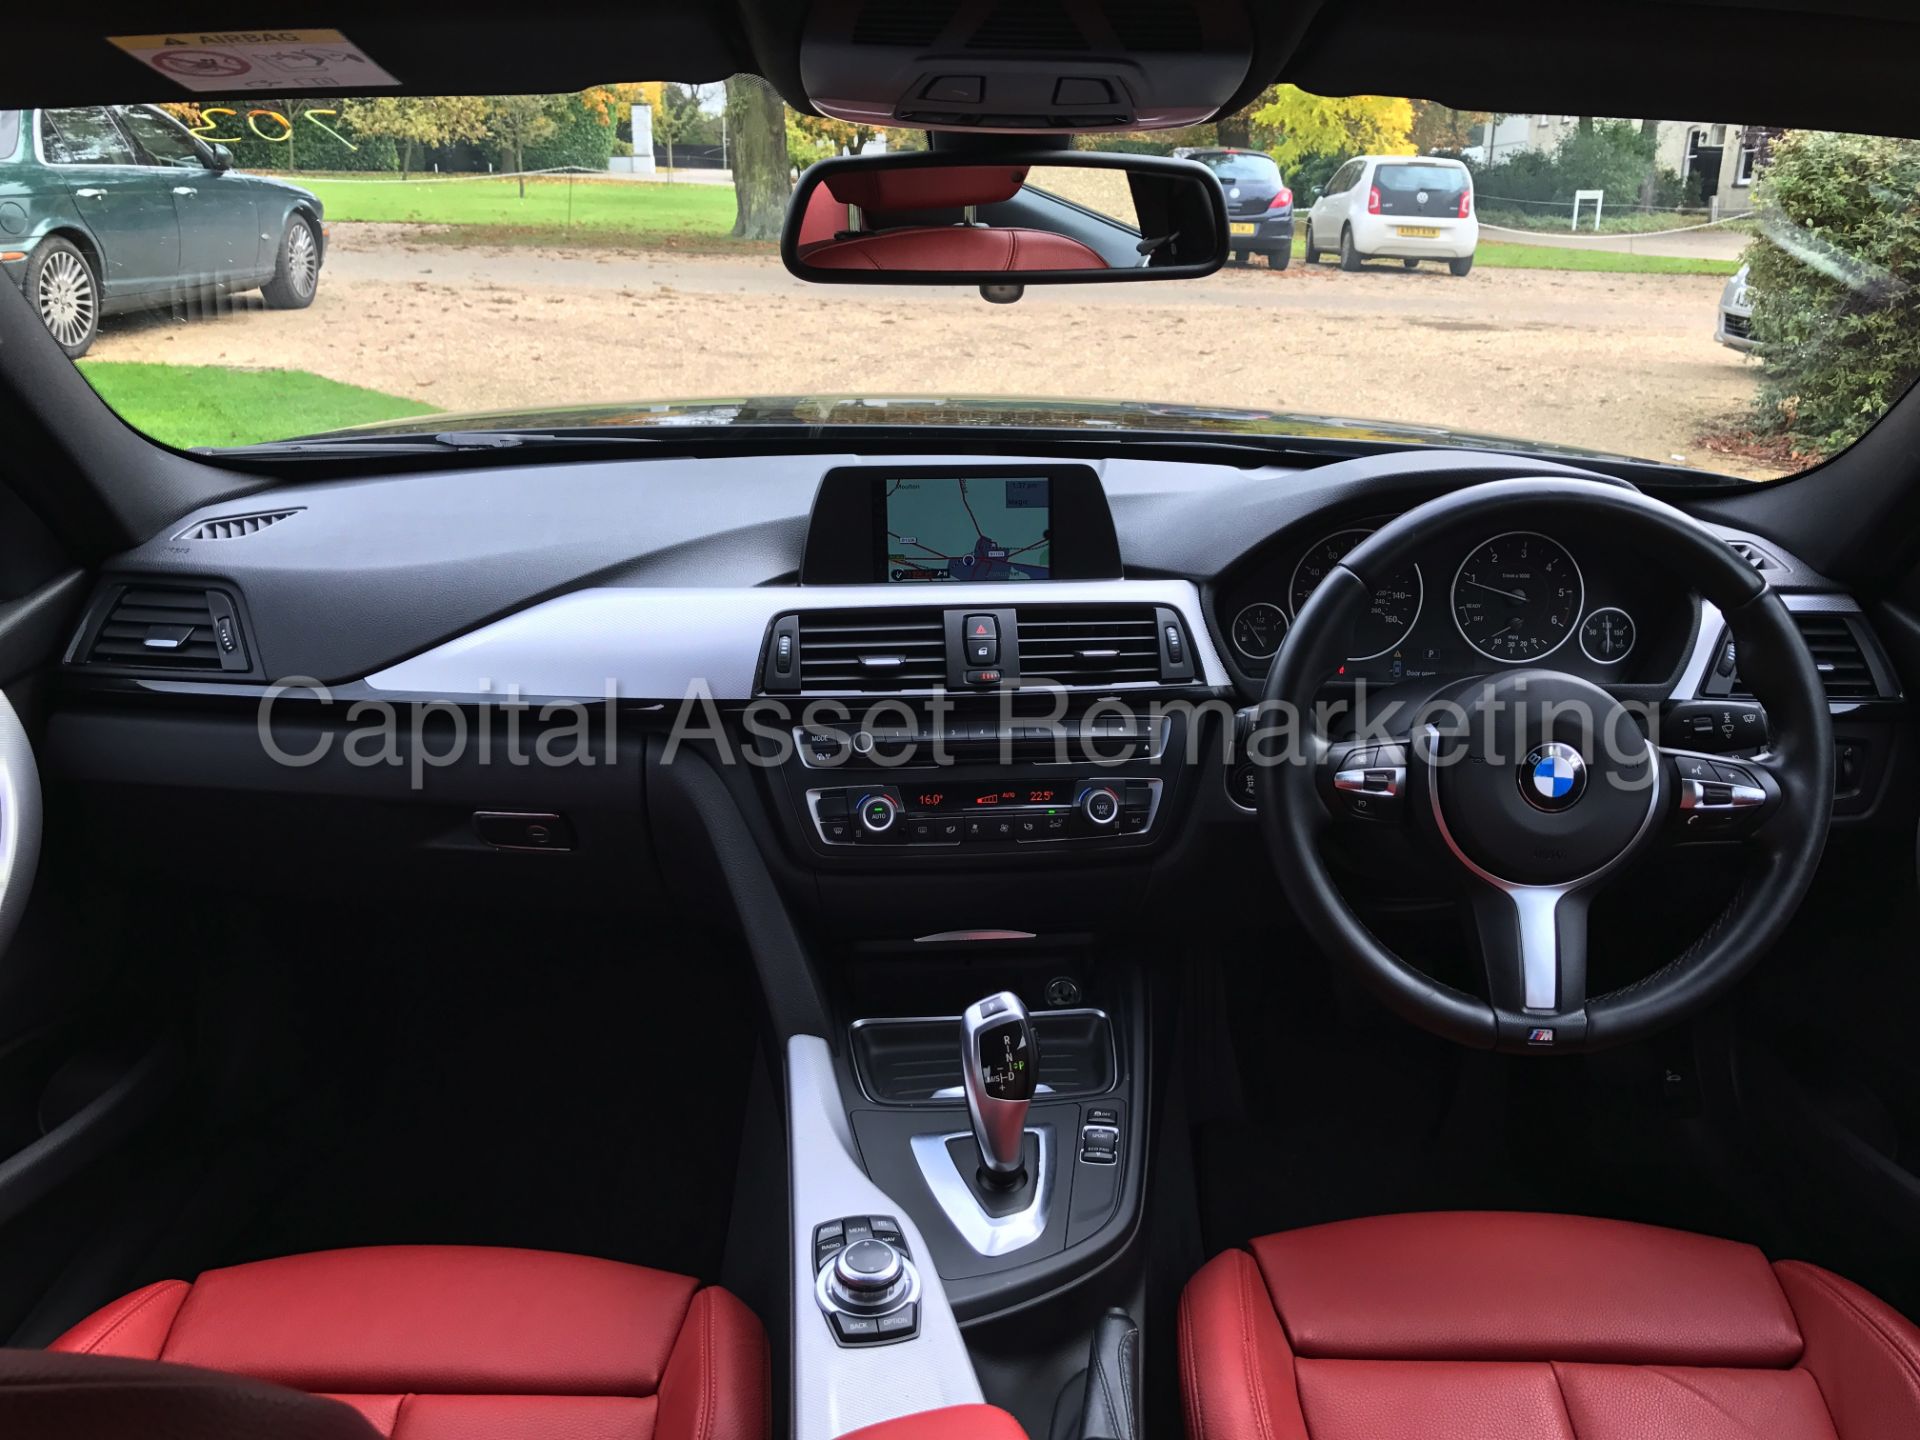 BMW 320D 'M SPORT' (2014 MODEL) '8 SPEED AUTO - LEATHER - SAT NAV' (1 OWNER FROM NEW - FULL HISTORY) - Image 26 of 28